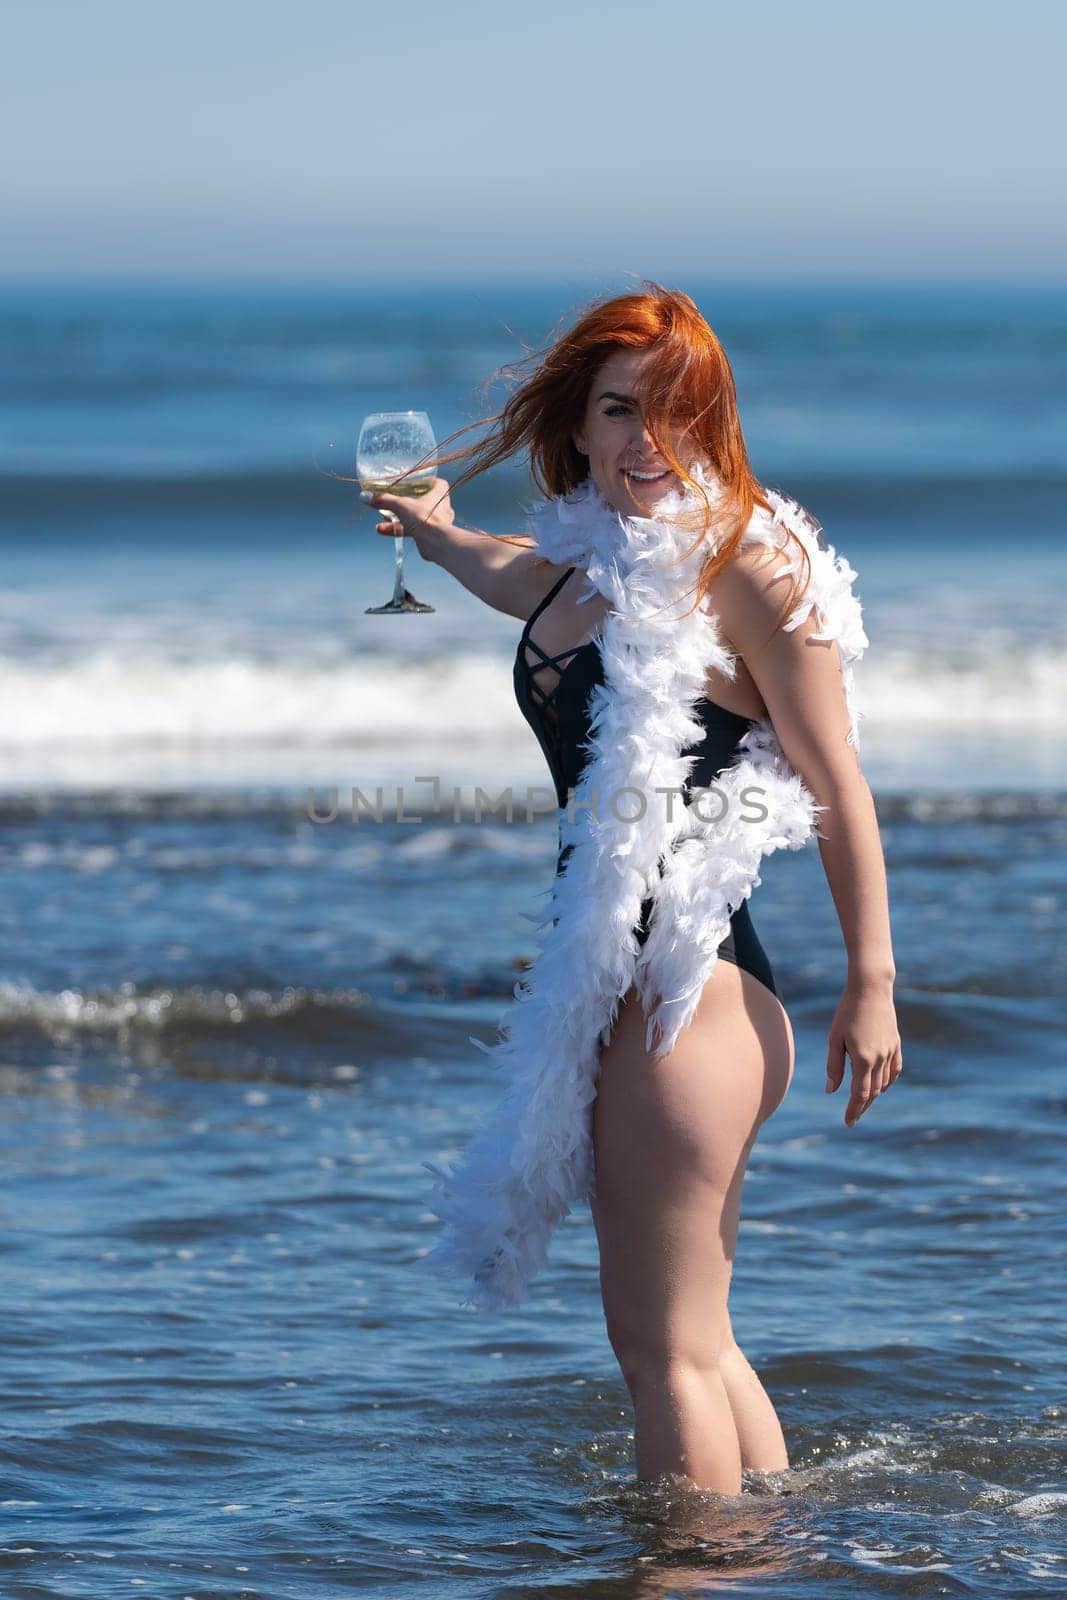 Joyful smiling redhead woman in black one piece swimsuit stands ankle deep in breaking wave of sea and holding glass of wine. Happiness woman has feather boa wrapped around neck. Summer sunny day